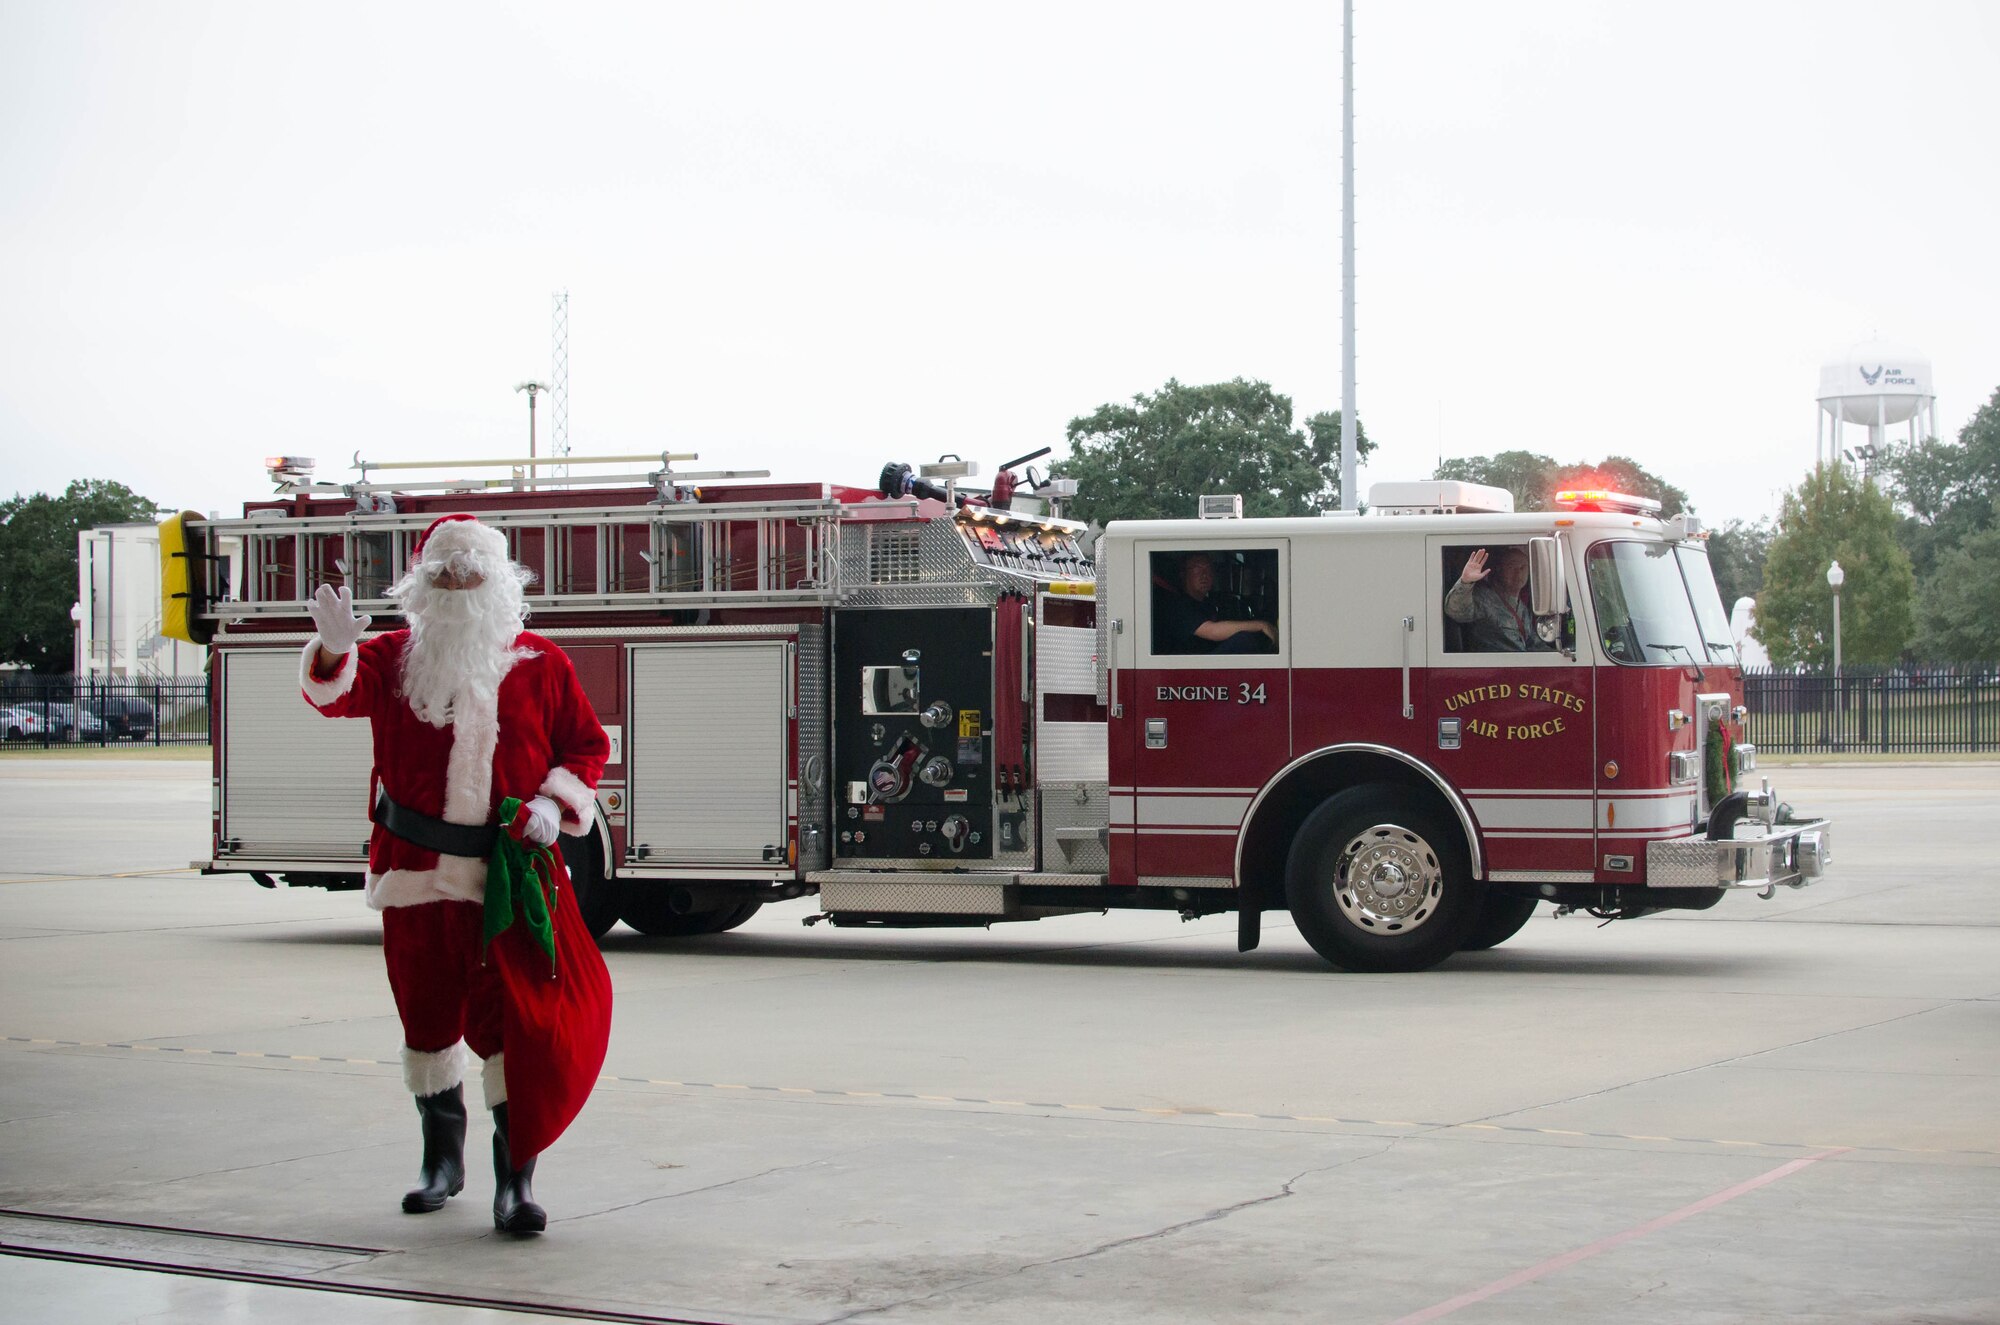 Santa arrives at the 403rd Wing children's holiday party on a fire truck Dec. 3. The annual event also included bounce houses, crafts and food. (U.S. Air Force photo/Staff Sgt. Heather Heiney)